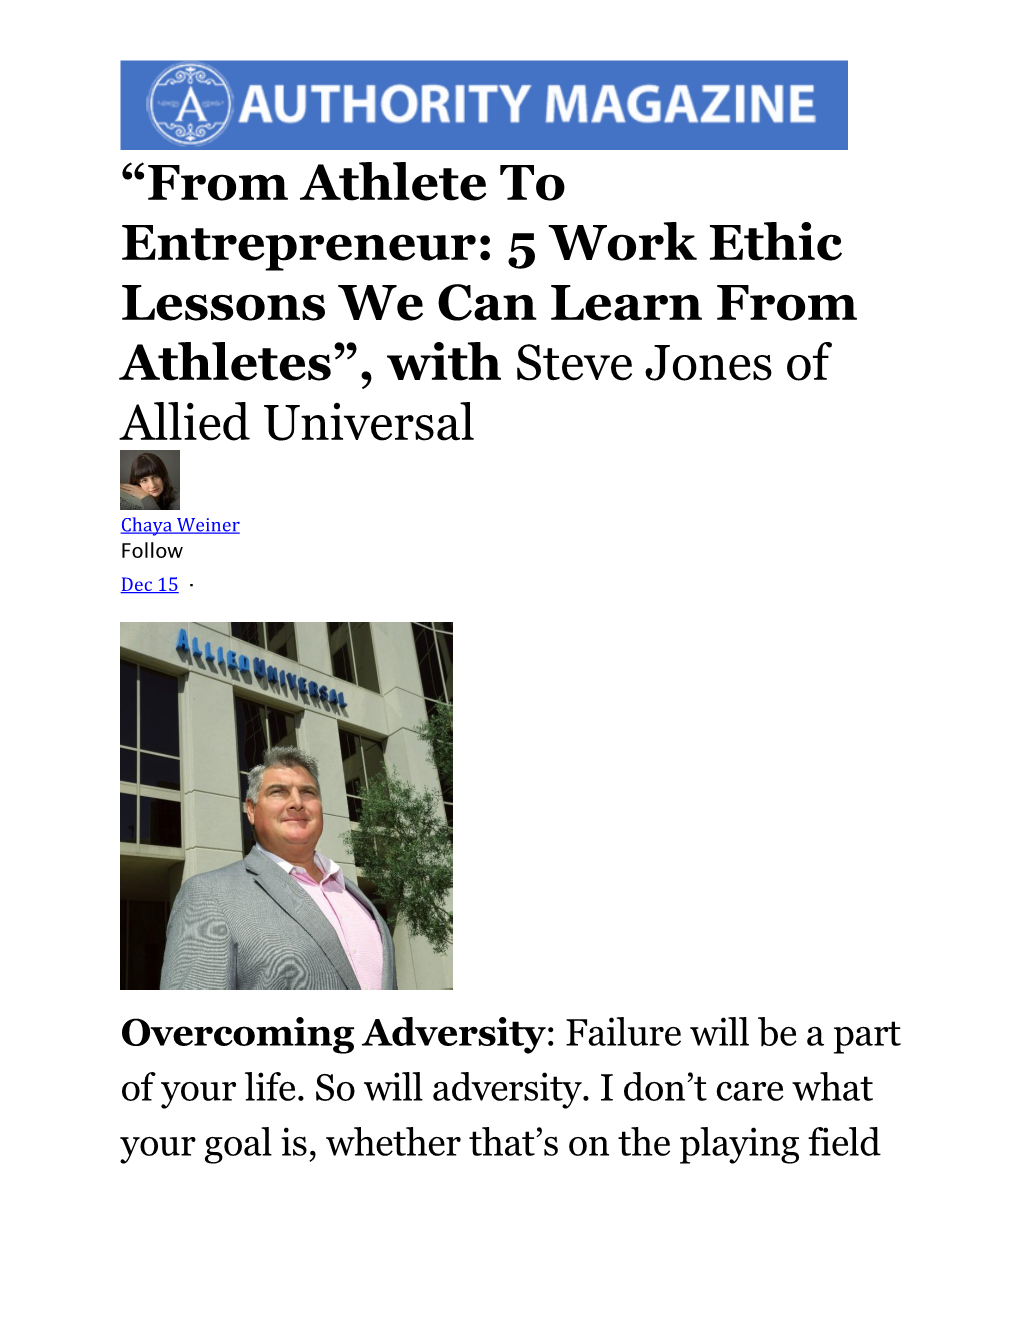 “From Athlete to Entrepreneur: 5 Work Ethic Lessons We Can Learn from Athletes”, with Steve Jones of Allied Universal